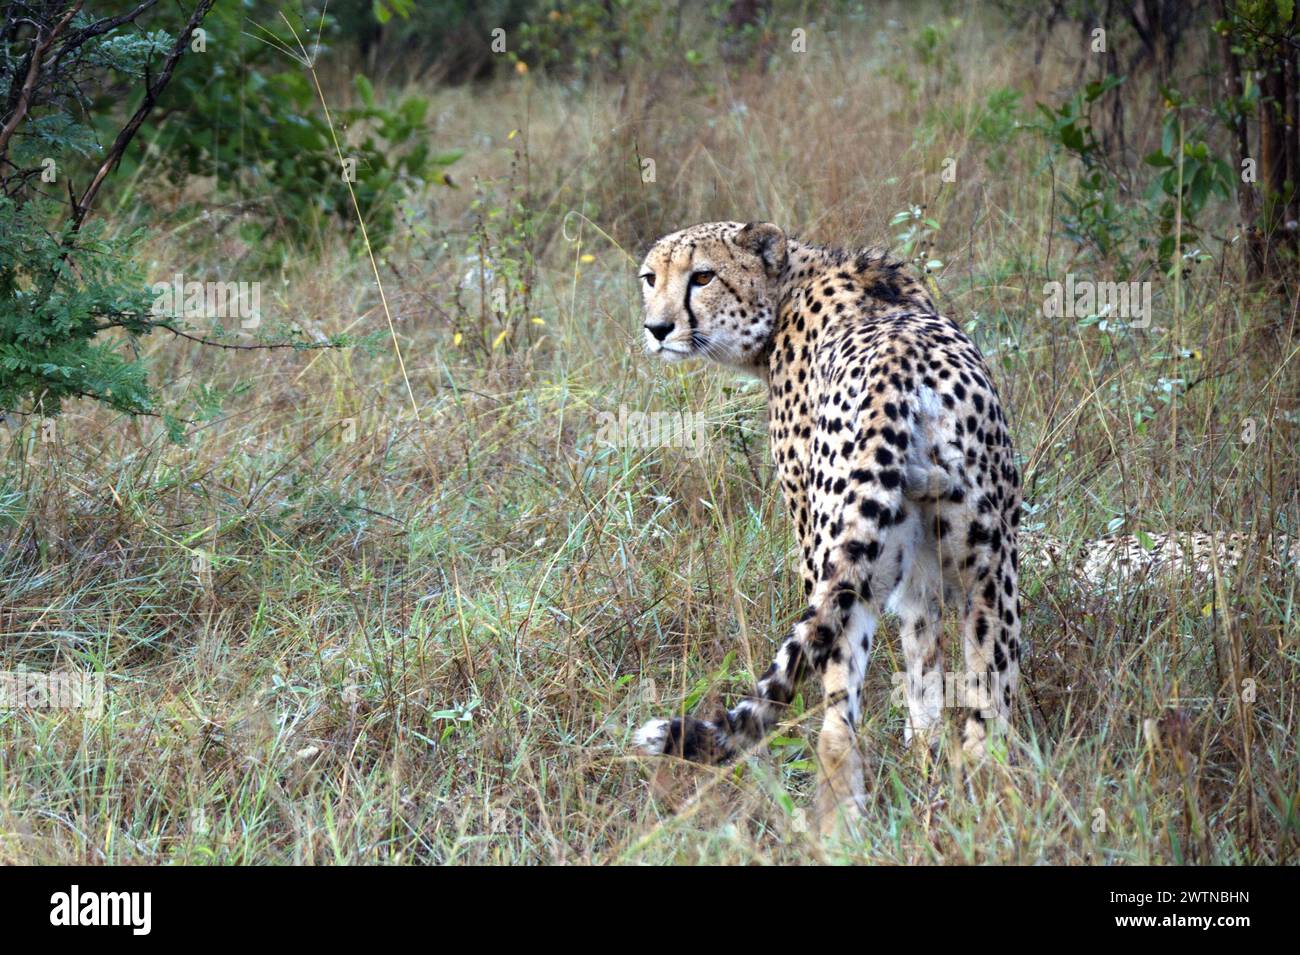 A Cheetah seen while on Safari in Karongwe Game Reserve, South Africa Stock Photo